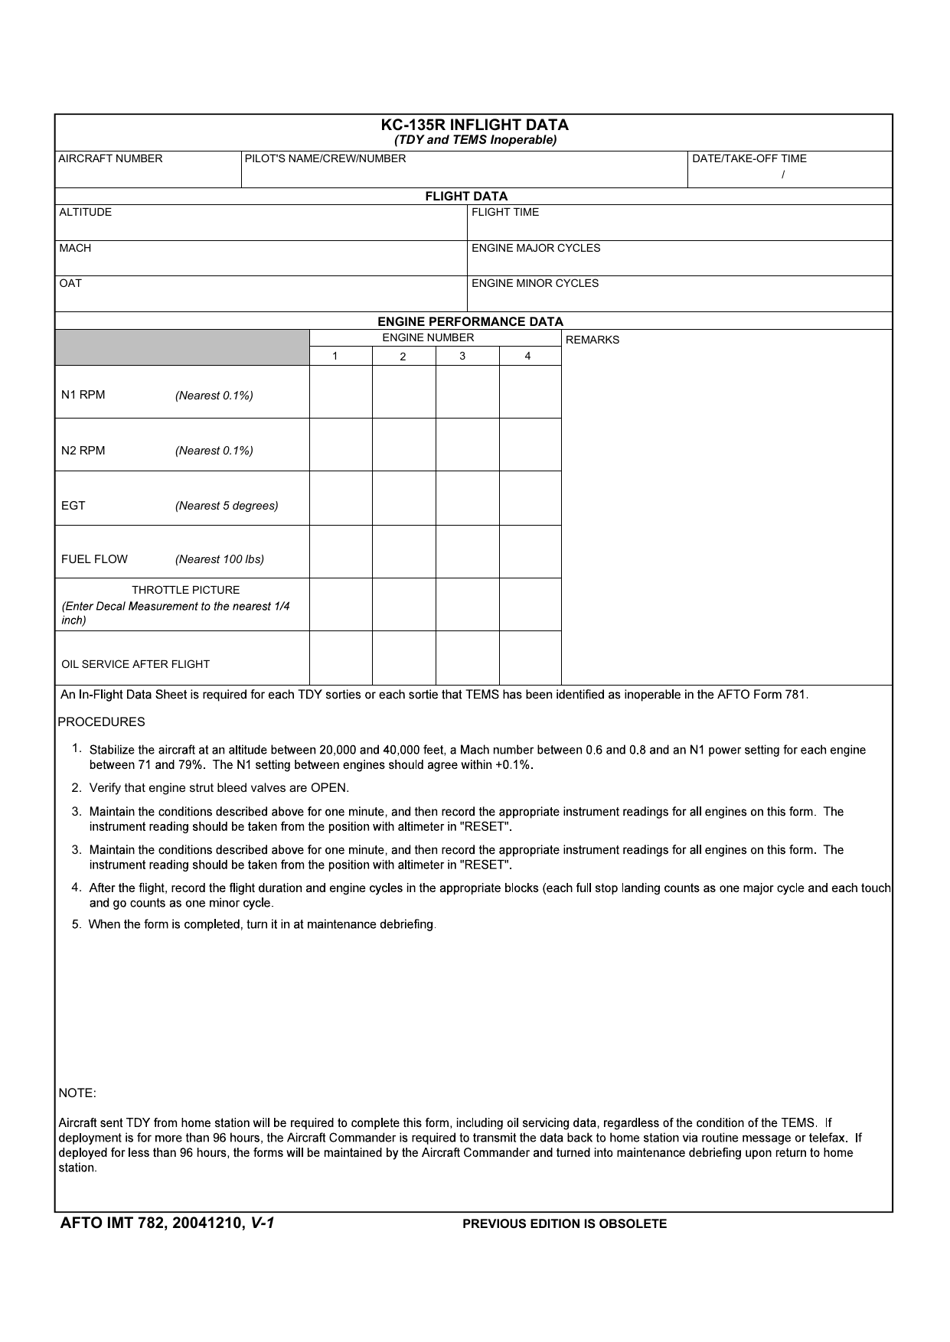 AFTO IMT Form 782 Kc-135r Inflight Data, Page 1